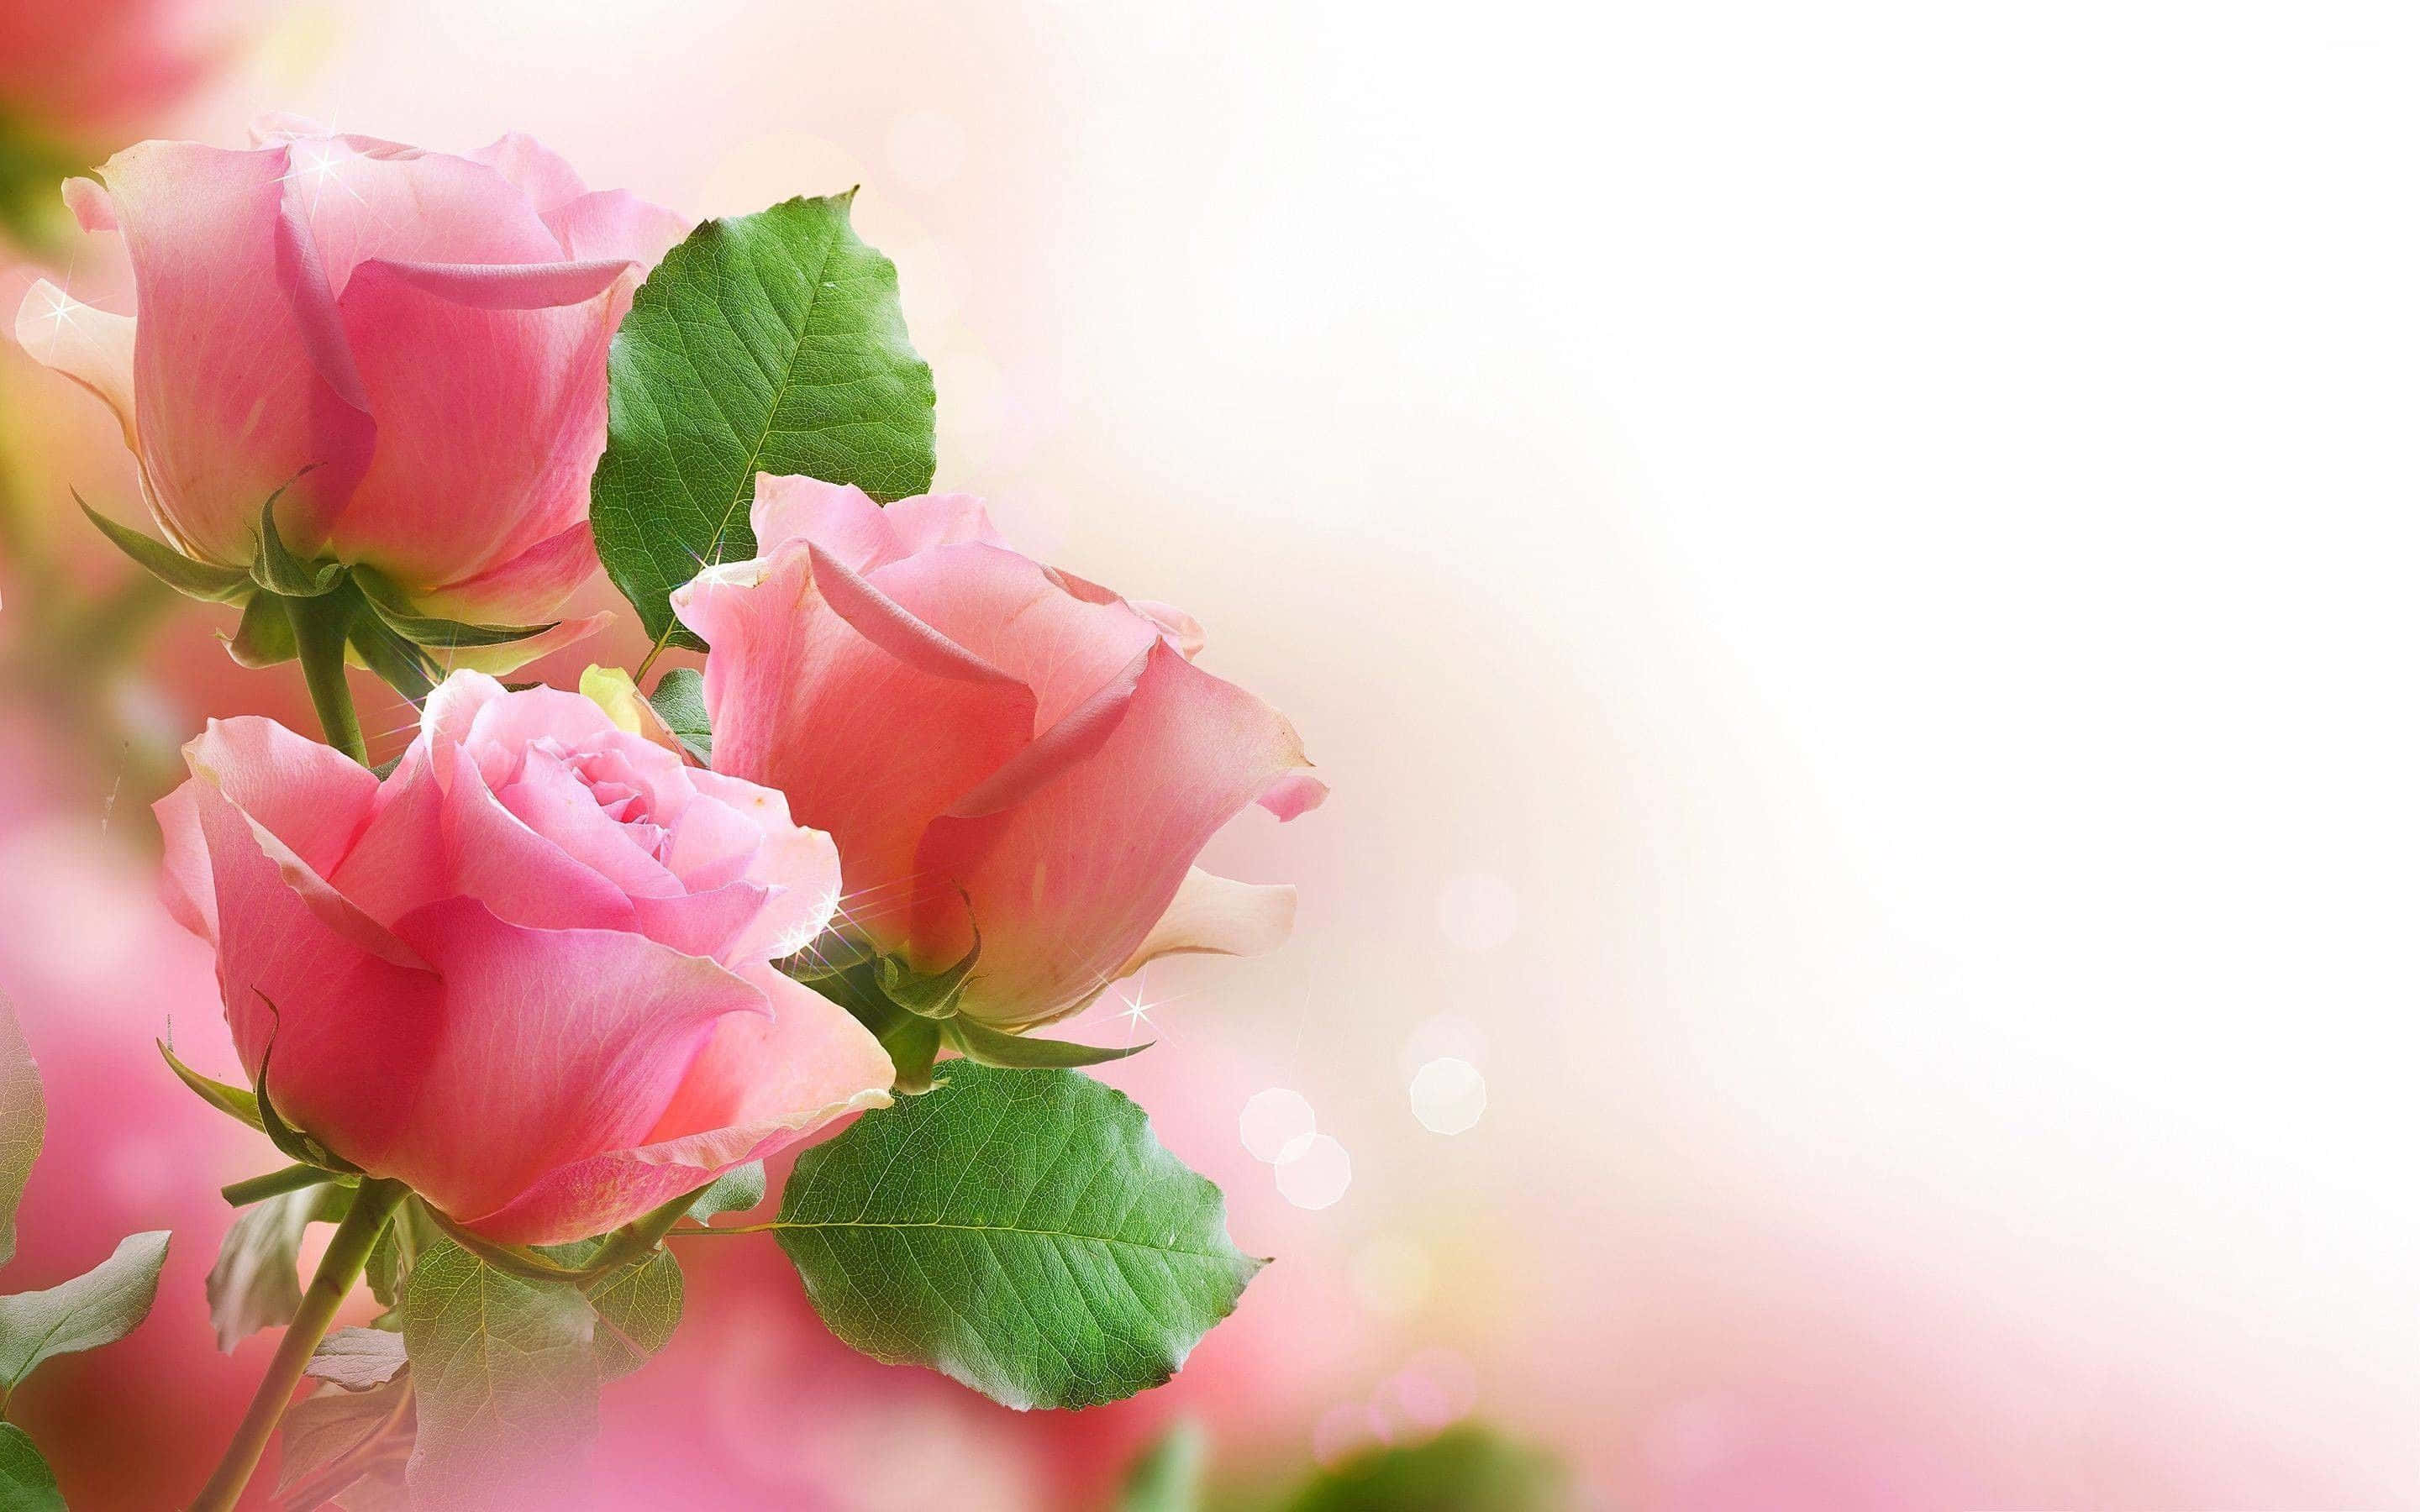 pink roses on a pink background